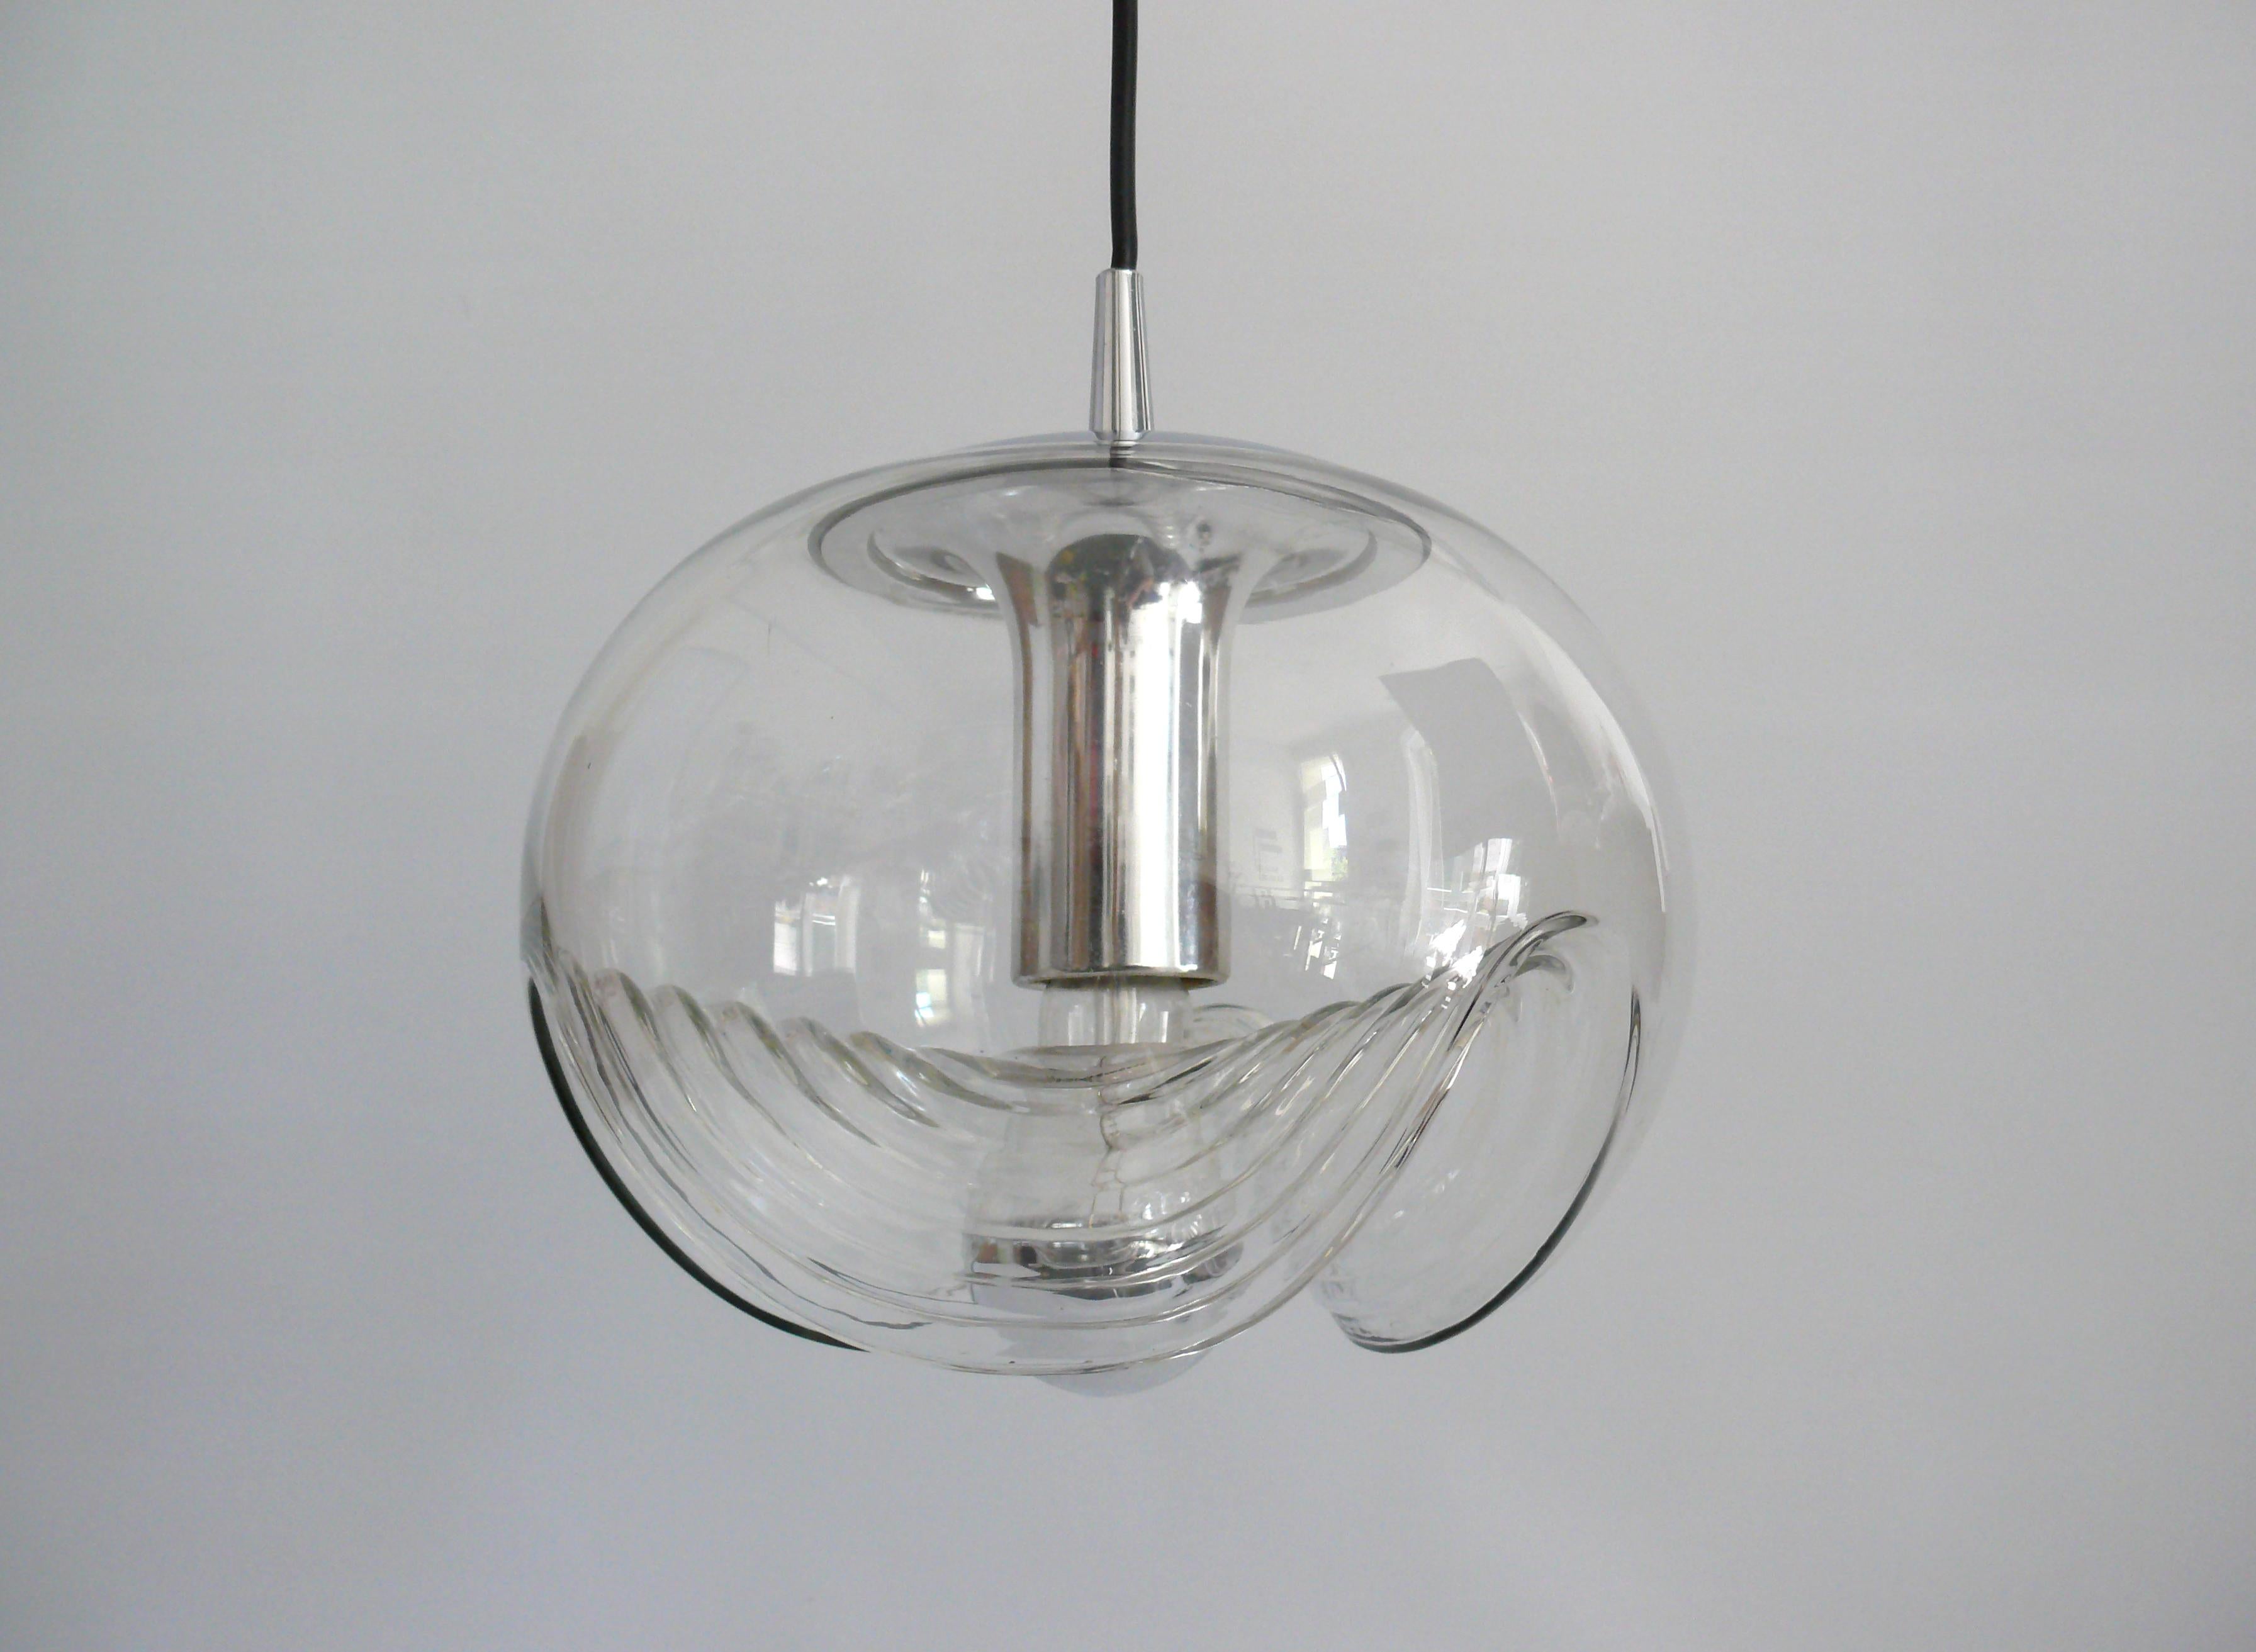 Peill & Putzler Wave pendant light: Very well-preserved pendant light from the 1970s. This lamp is the small version with a shade diameter of 27 cm. This classic was designed by Koch & Lowy for Peill & Putzler in Düren and won the 1975 IF Design